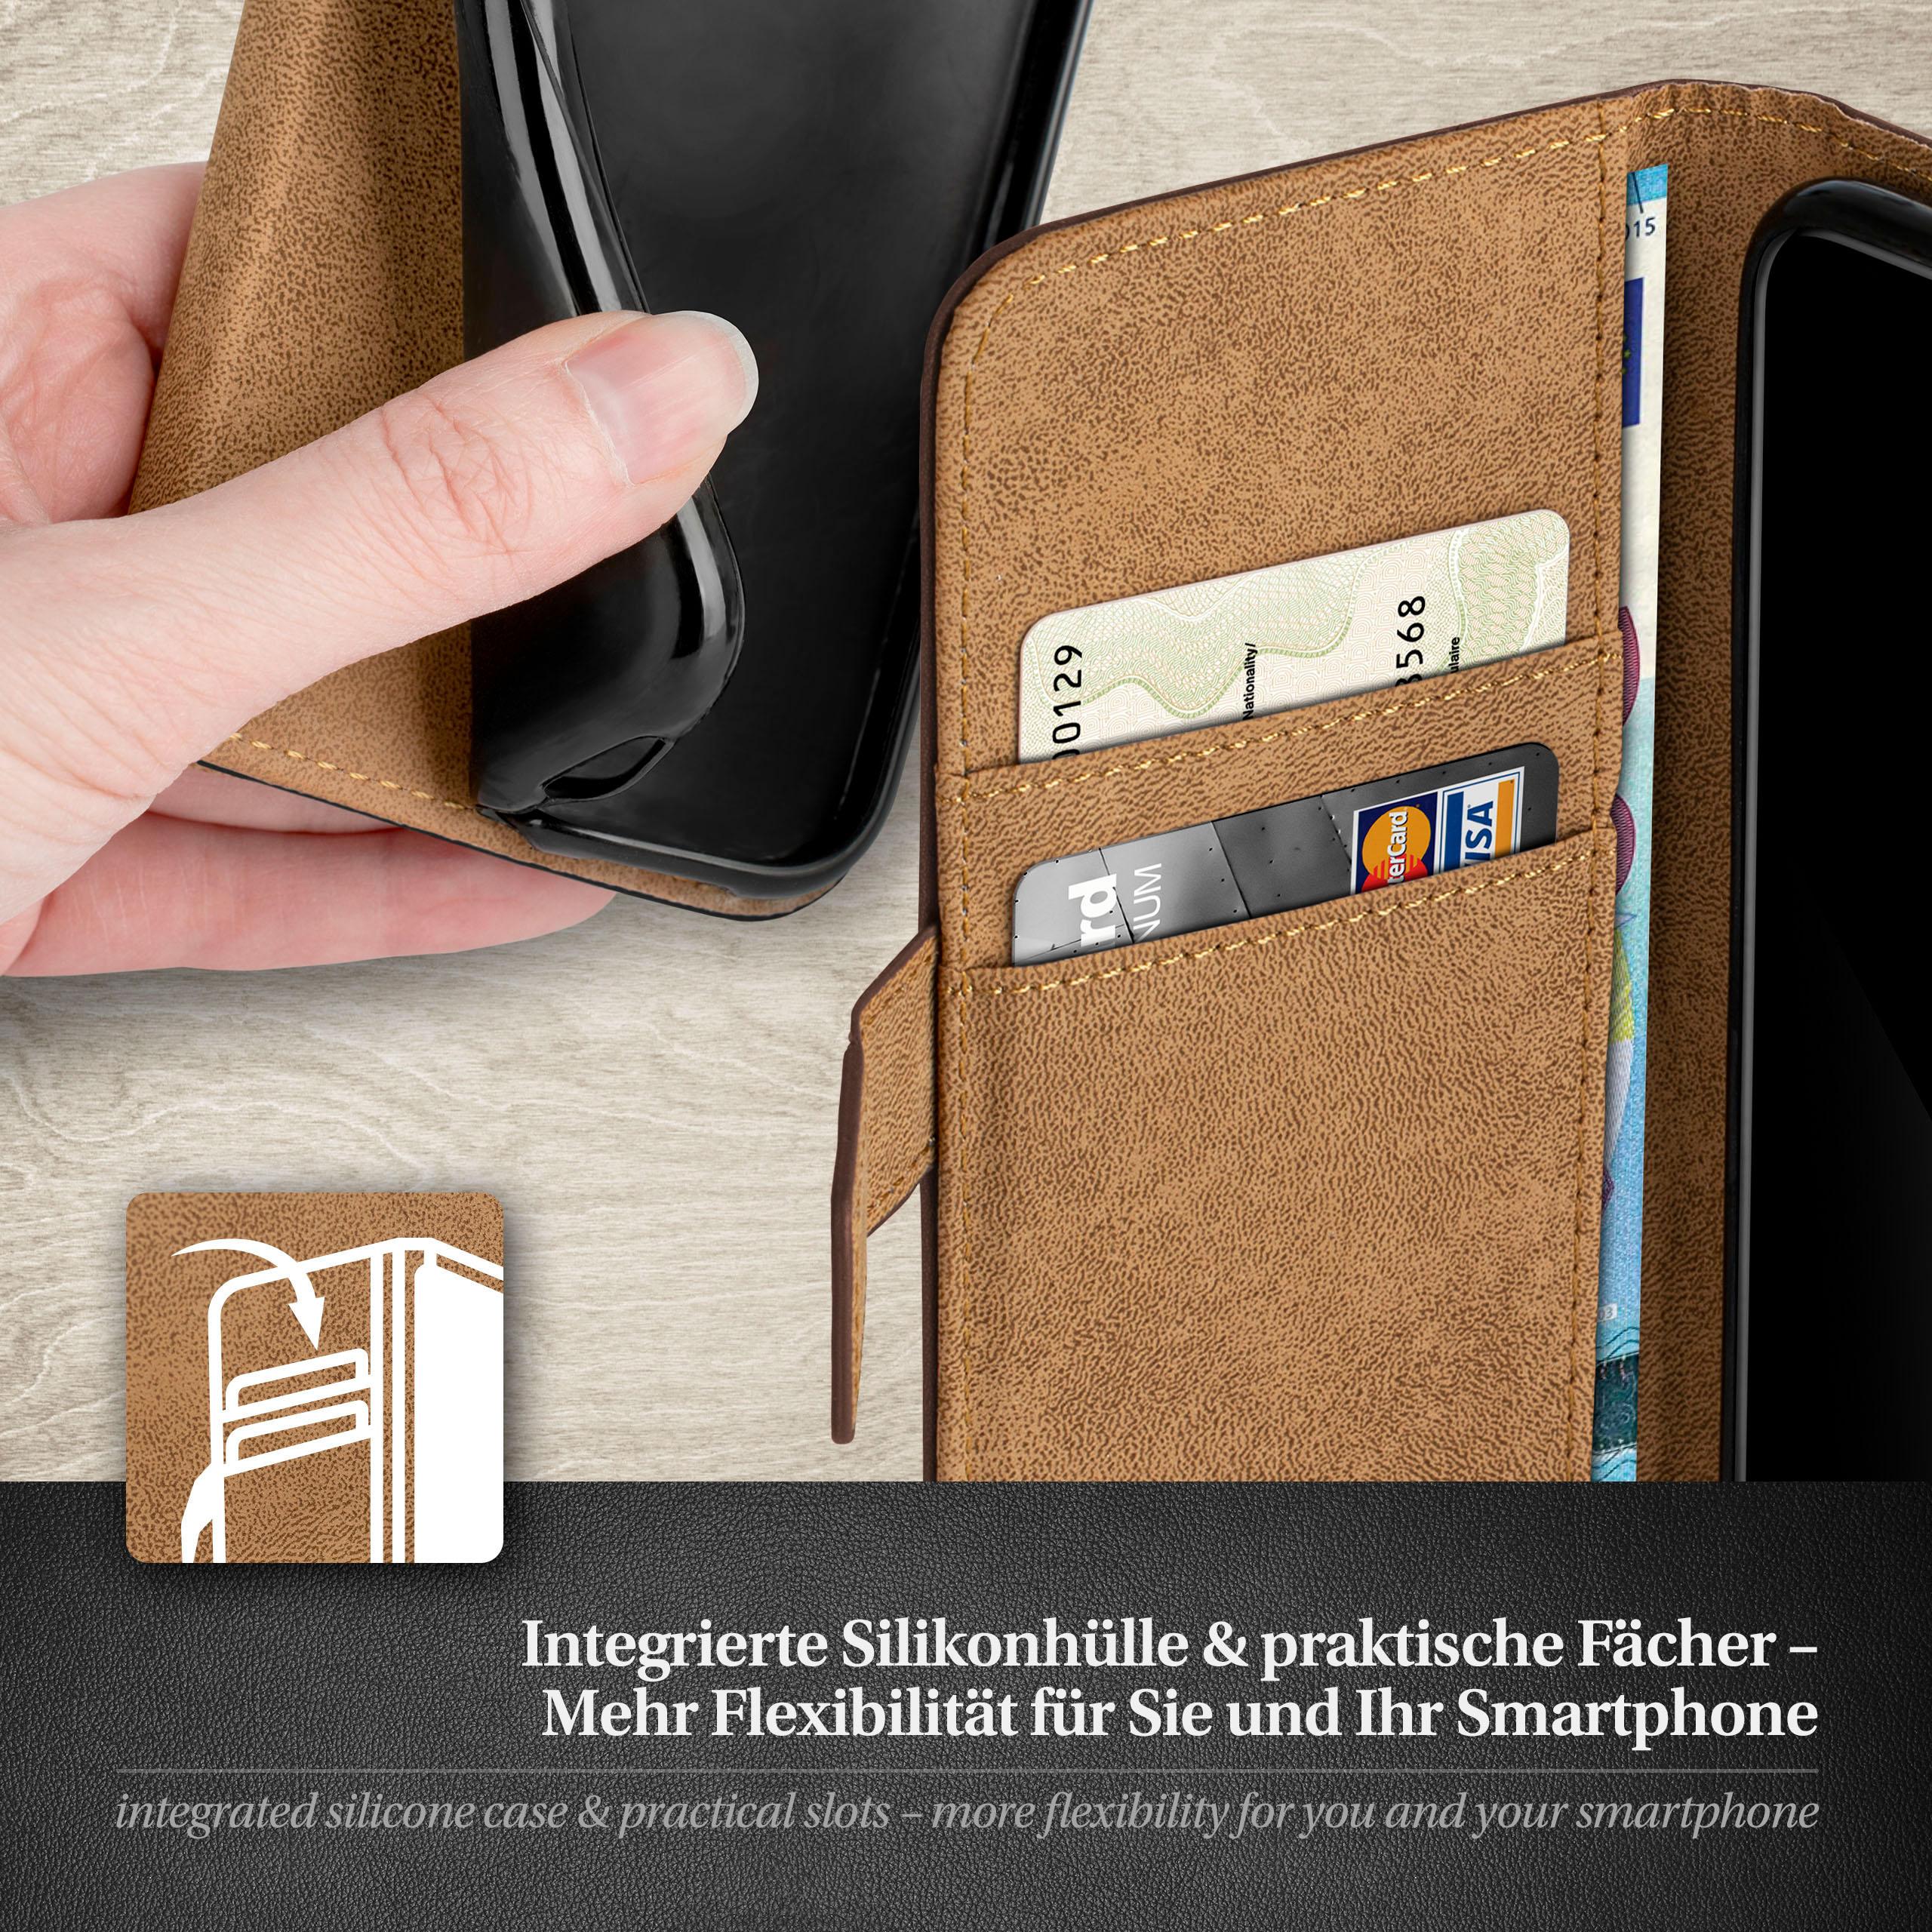 Case, Neo, Galaxy Samsung, Oxide-Brown Bookcover, MOEX Note Book 3